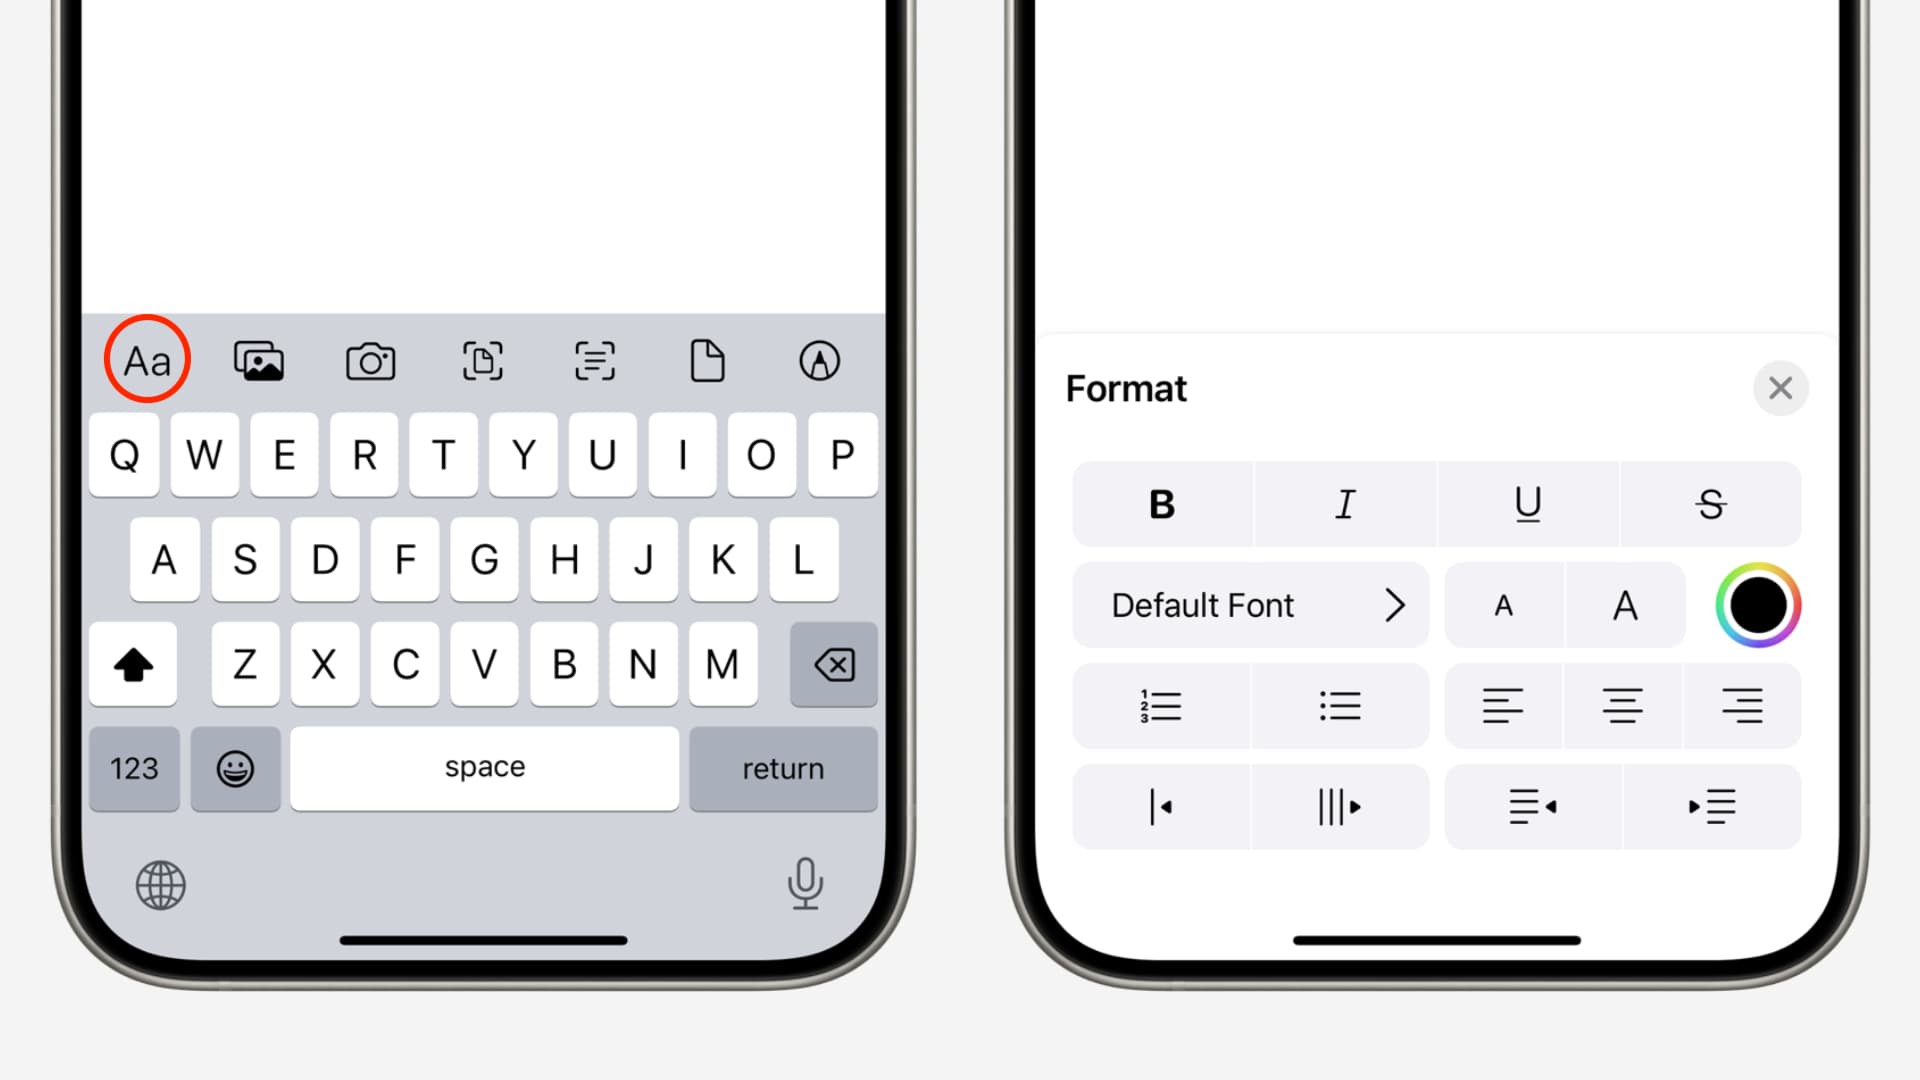 Format your email in Apple mail